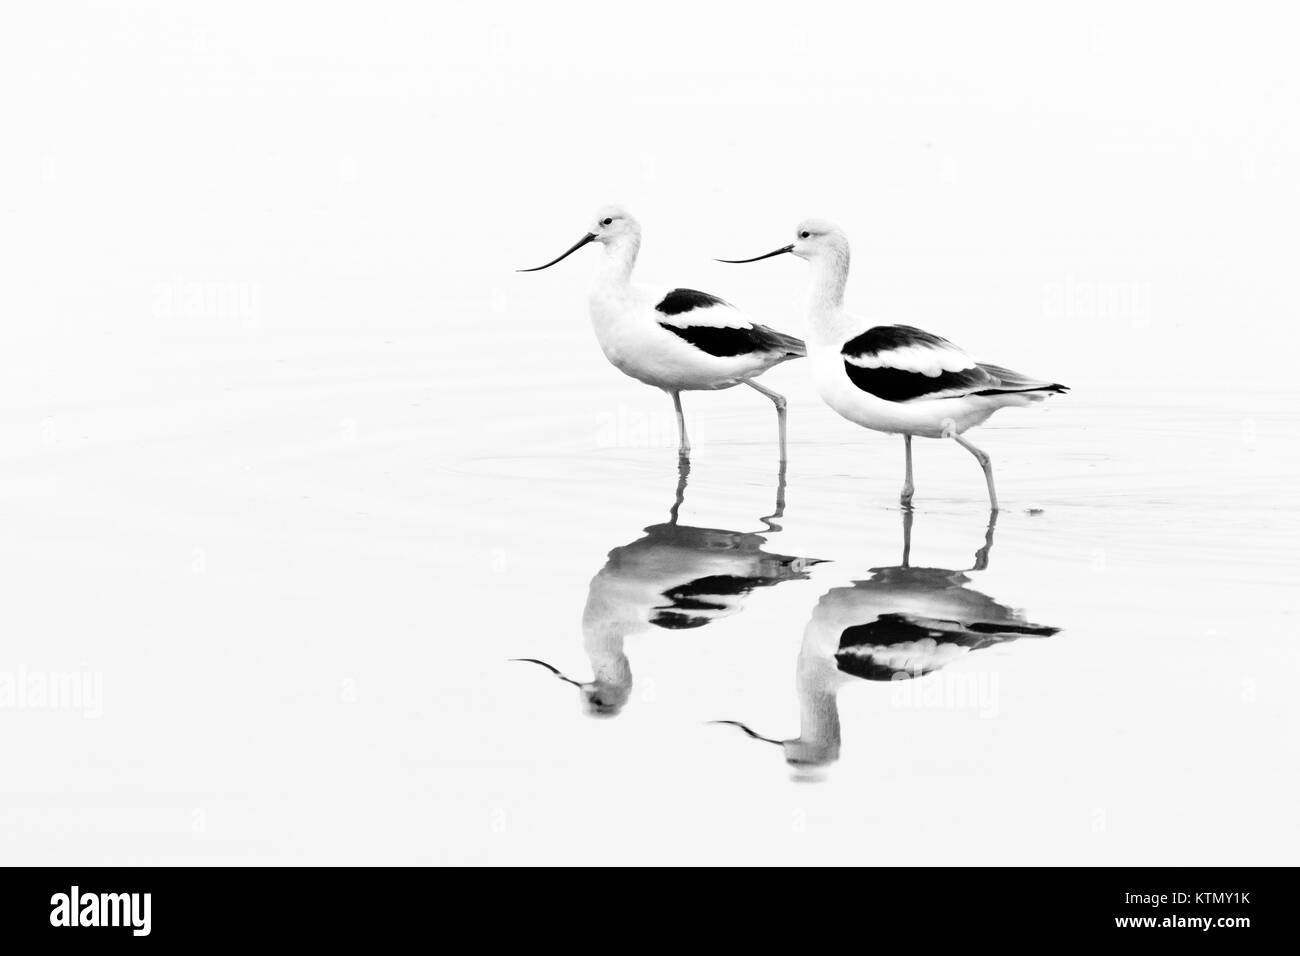 American Avocets, in winter plumage, wading in the waters of the San Pablo Bay National Wildlife Refuge in northern California. Stock Photo